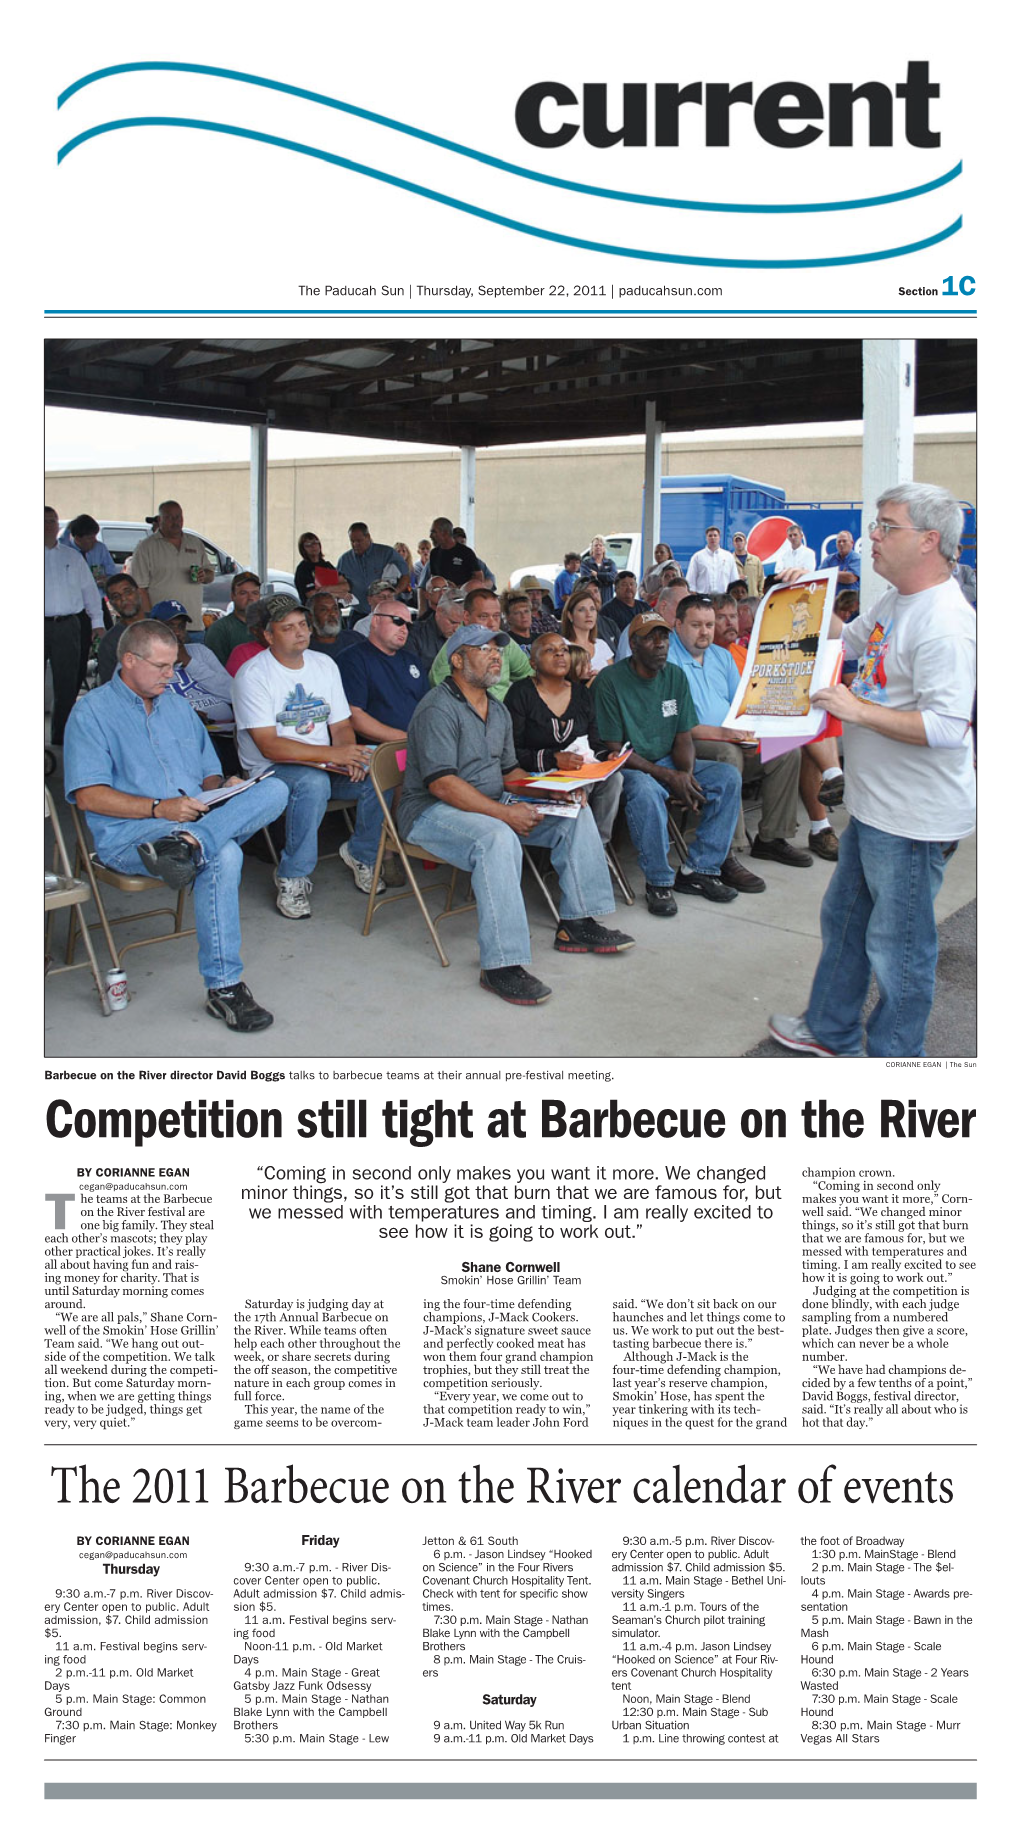 Competition Still Tight at Barbecue on the River